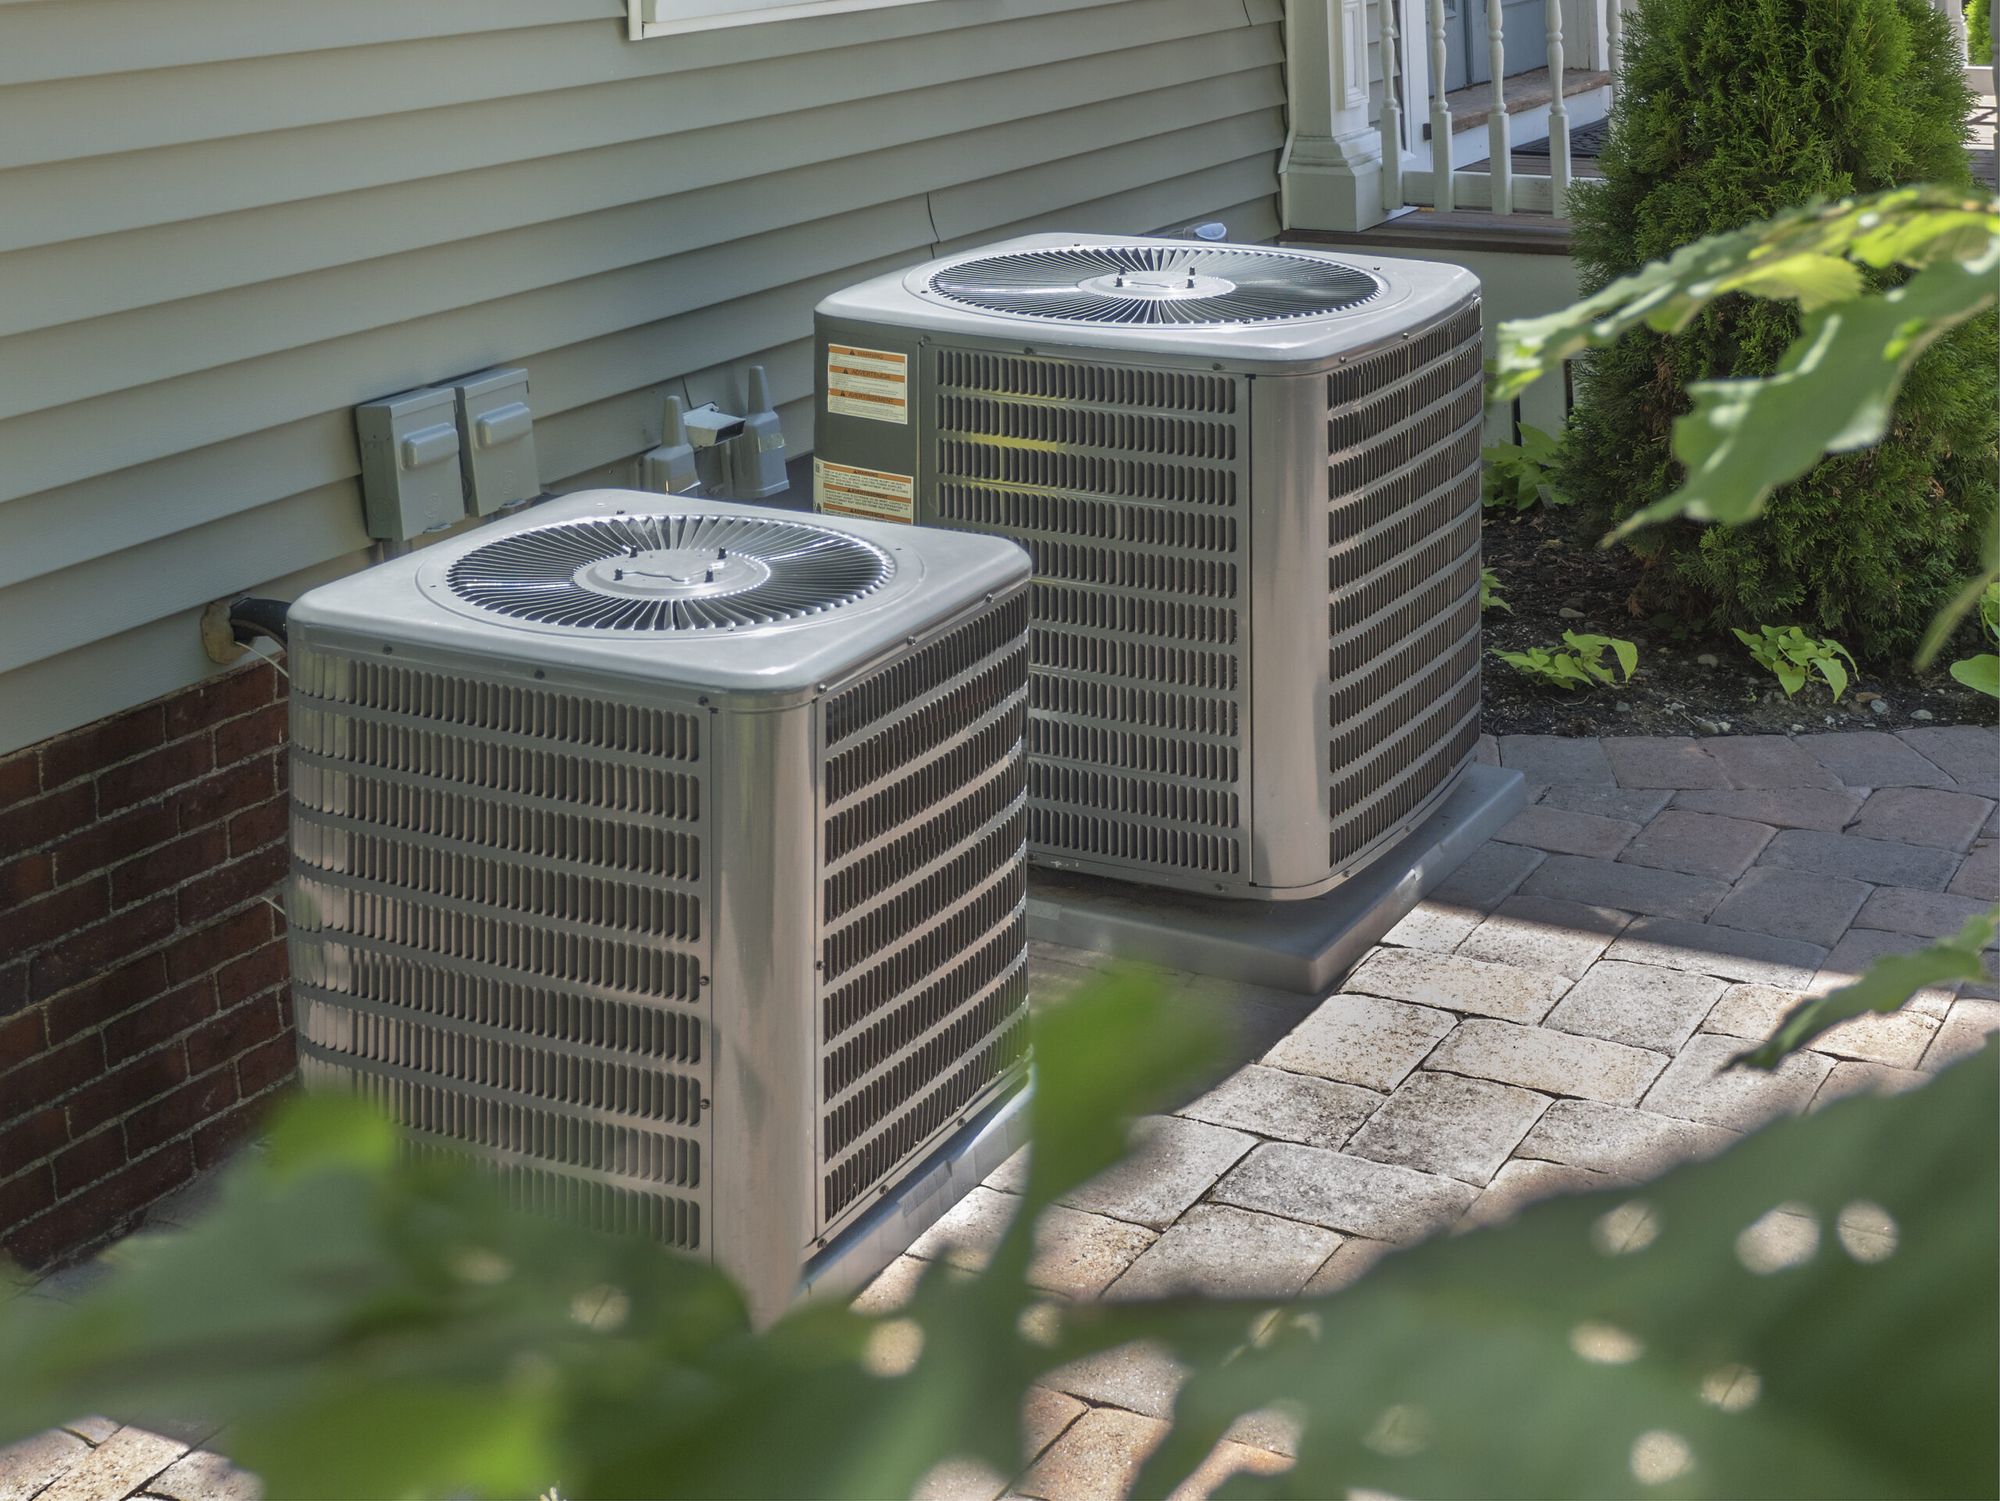 Top Tips For Managing Your Home Heating And Cooling Systems